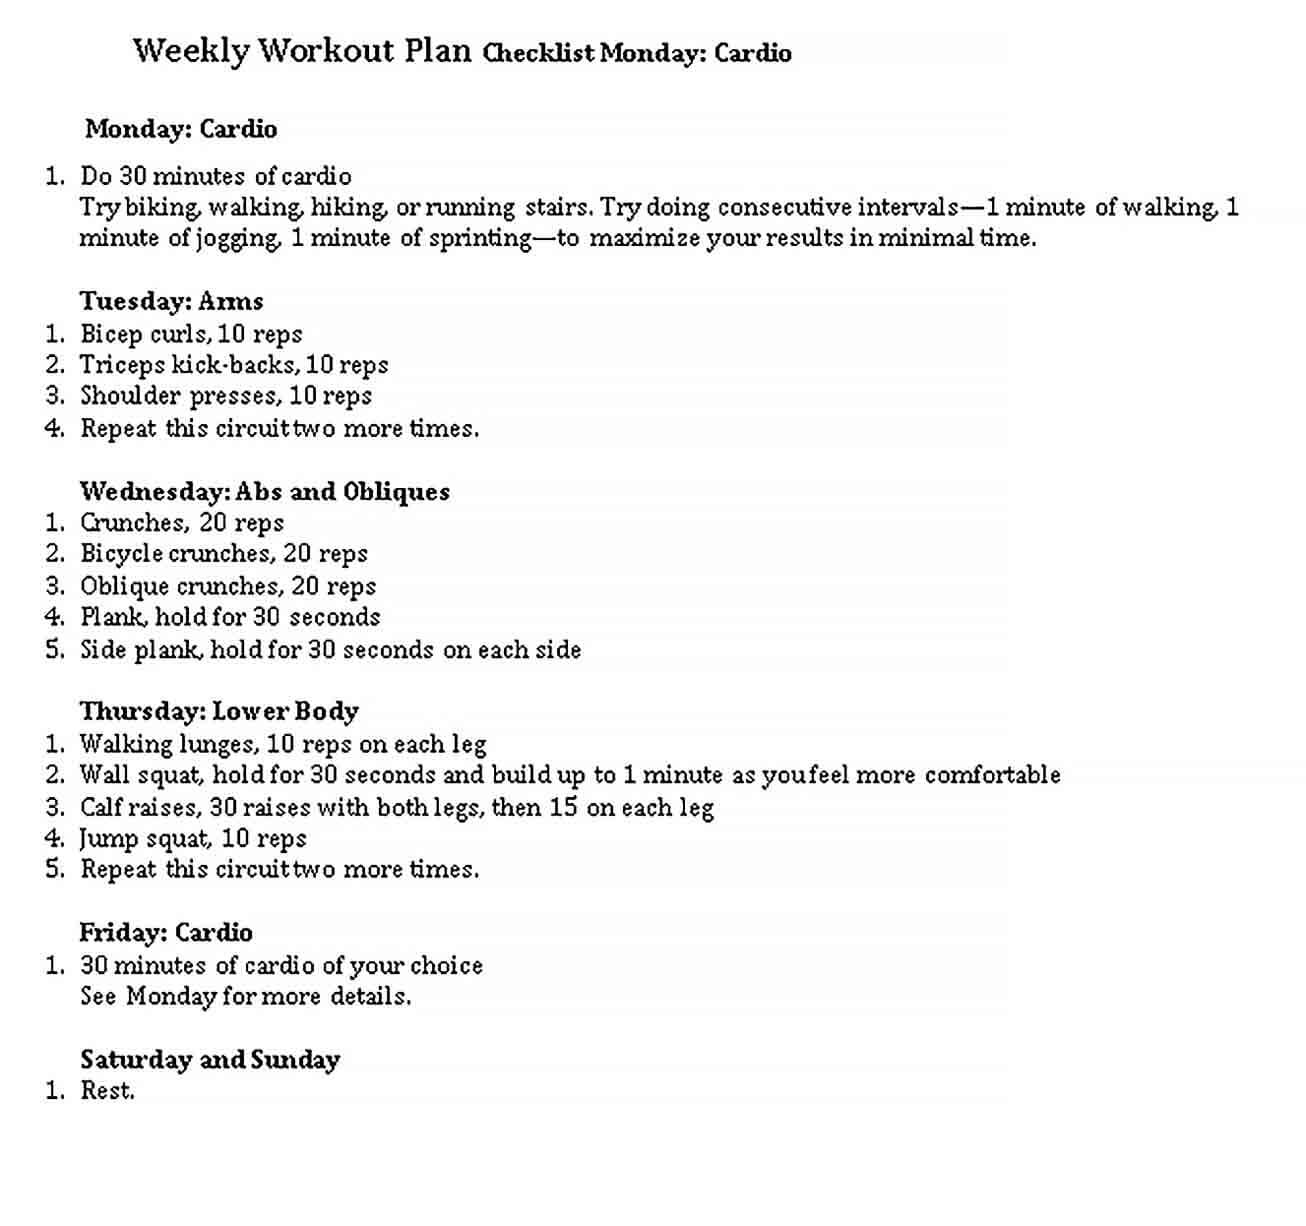 Sample Weekly Workout Checklist Template